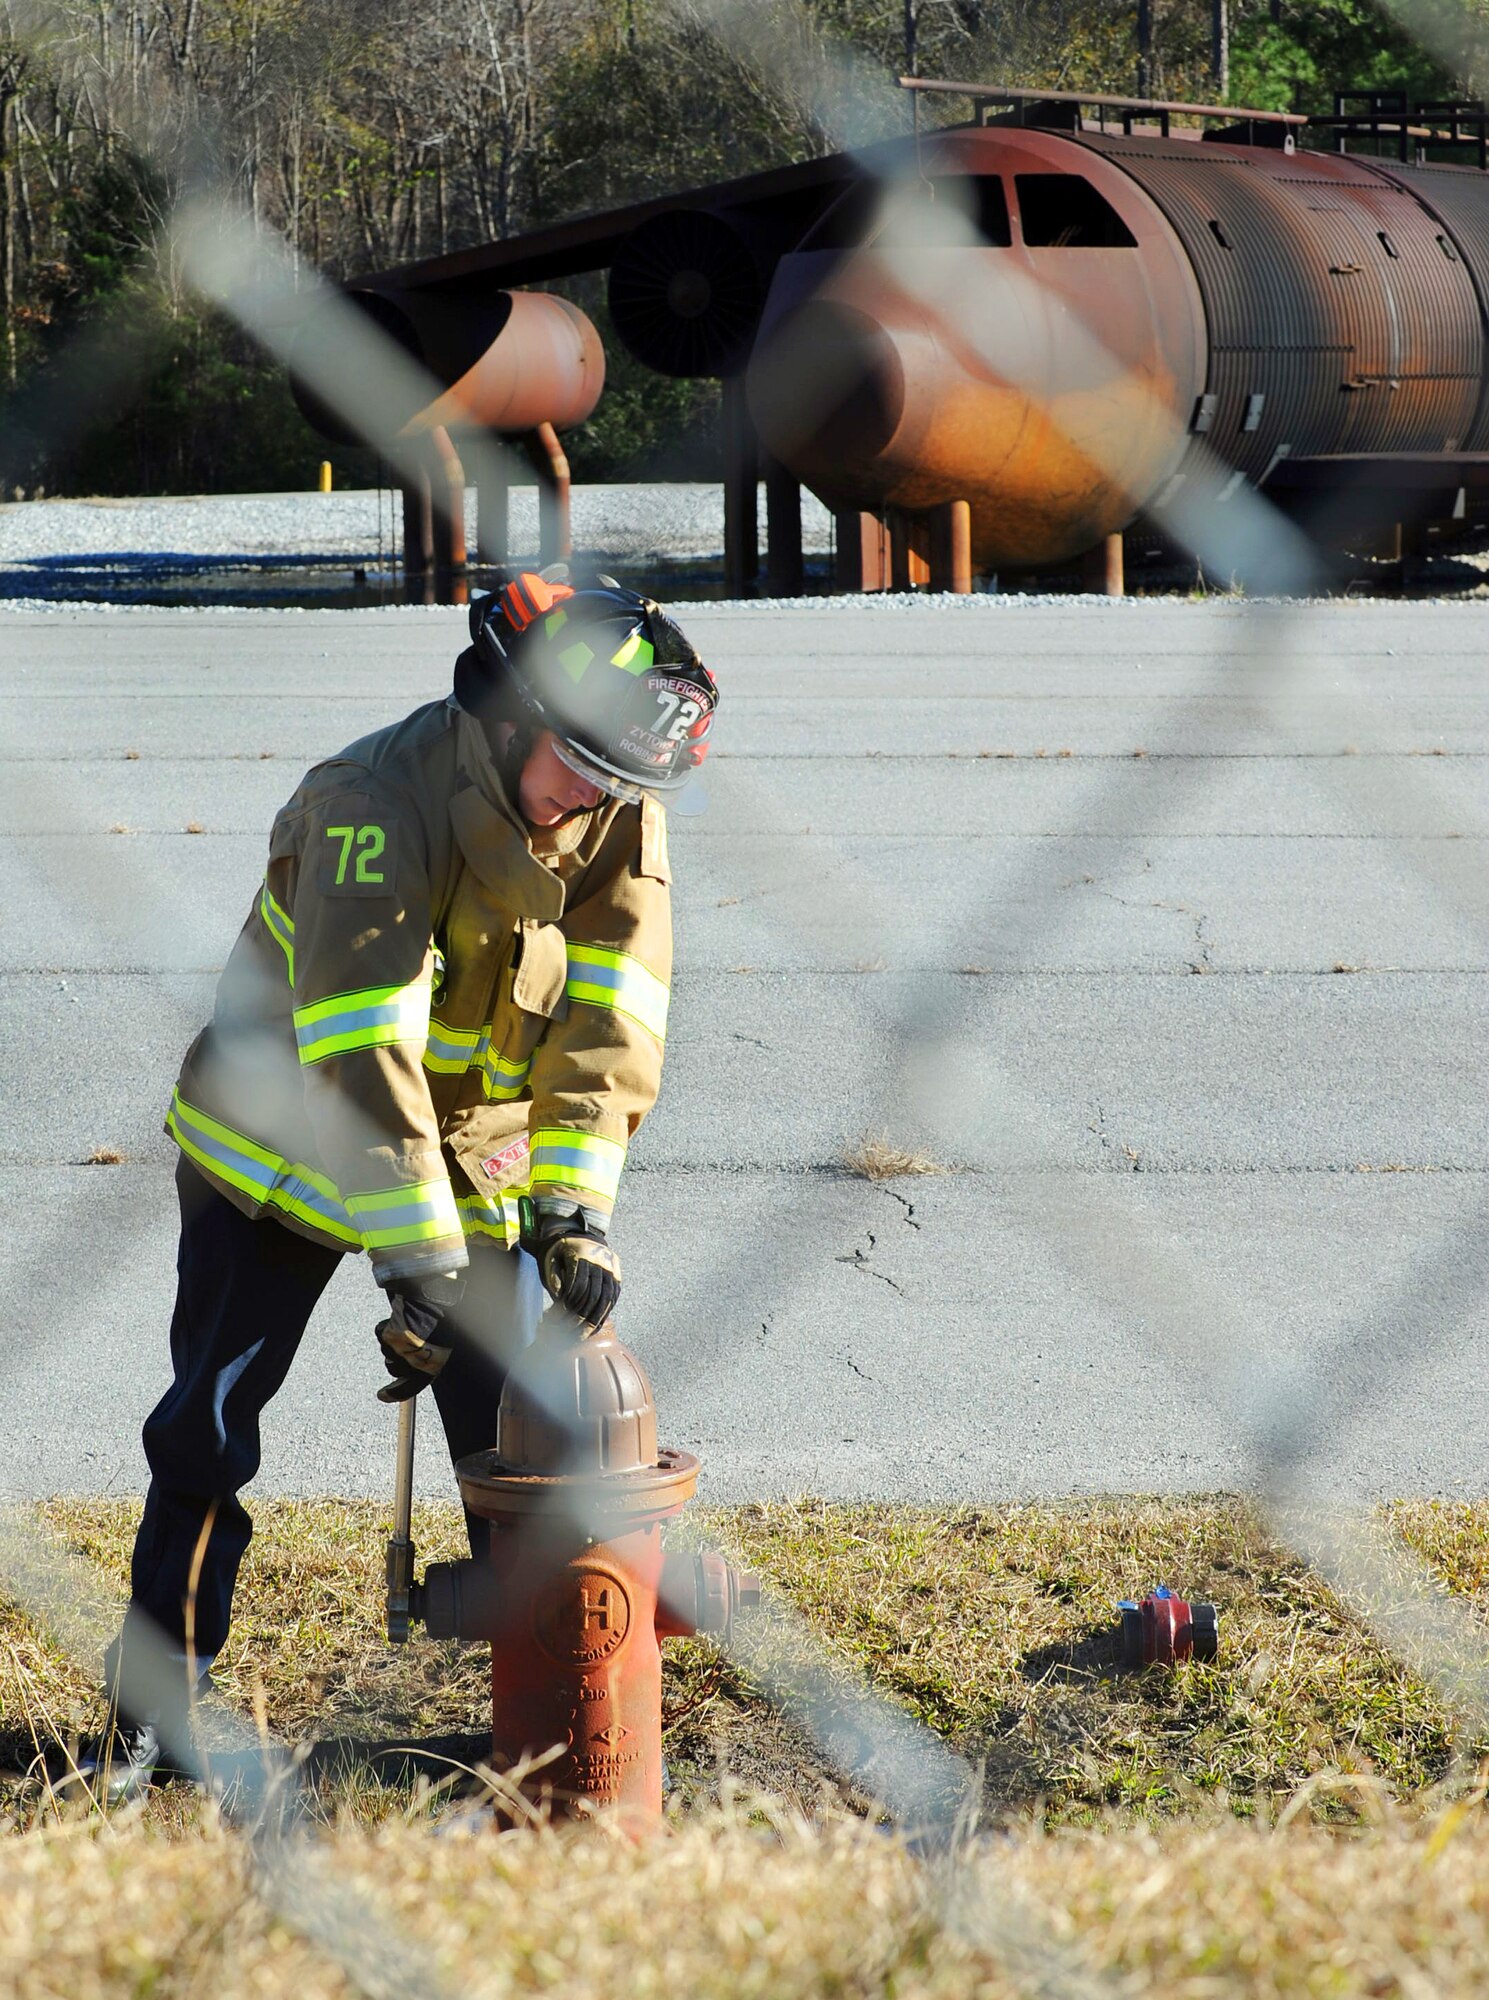 Daniel Zytowski, a Robins Air Force base firefighter, opens a fire hydrant in preparation for a joint training session between Macon-Bibb County and Robins Fire Departments Wednesday. A total of 22 firefighters participated in the training which both departments view as beneficial to their common mission of fighting fires and saving lives. (U.S. Air Force photo by Tommie Horton)